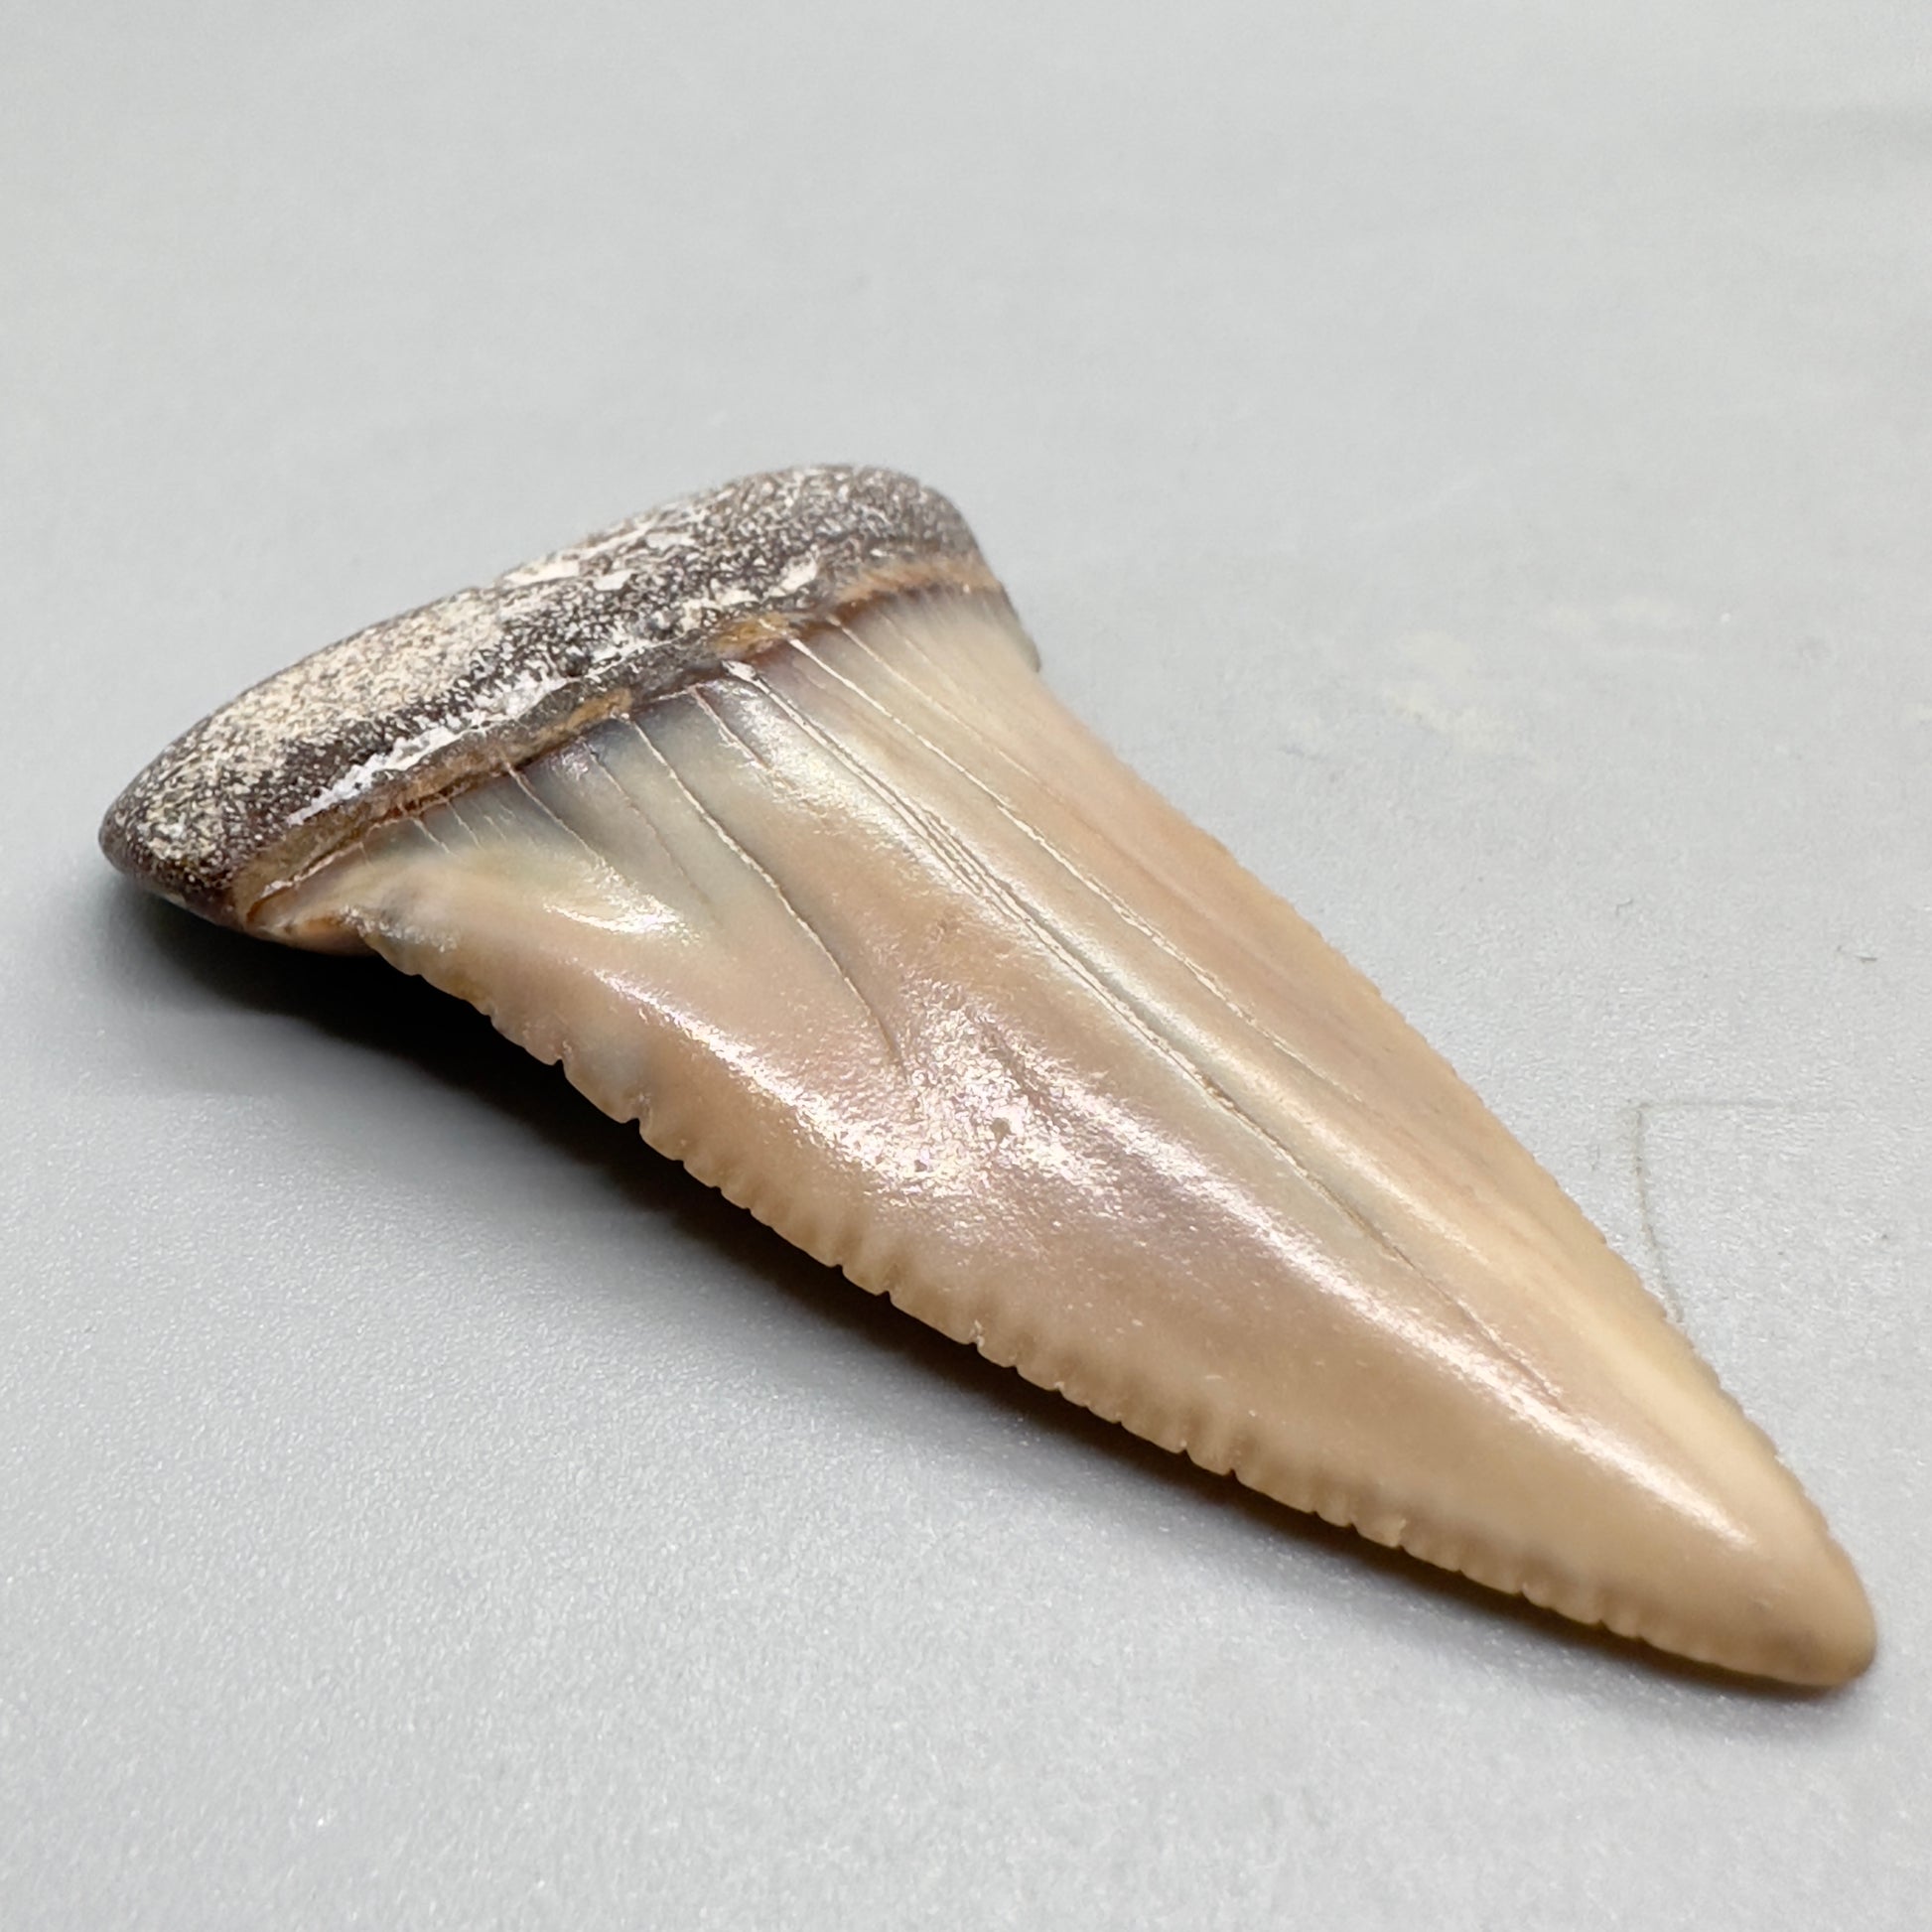 Cream and orange great white shark tooth 2.16 inch Peru GW4 front left